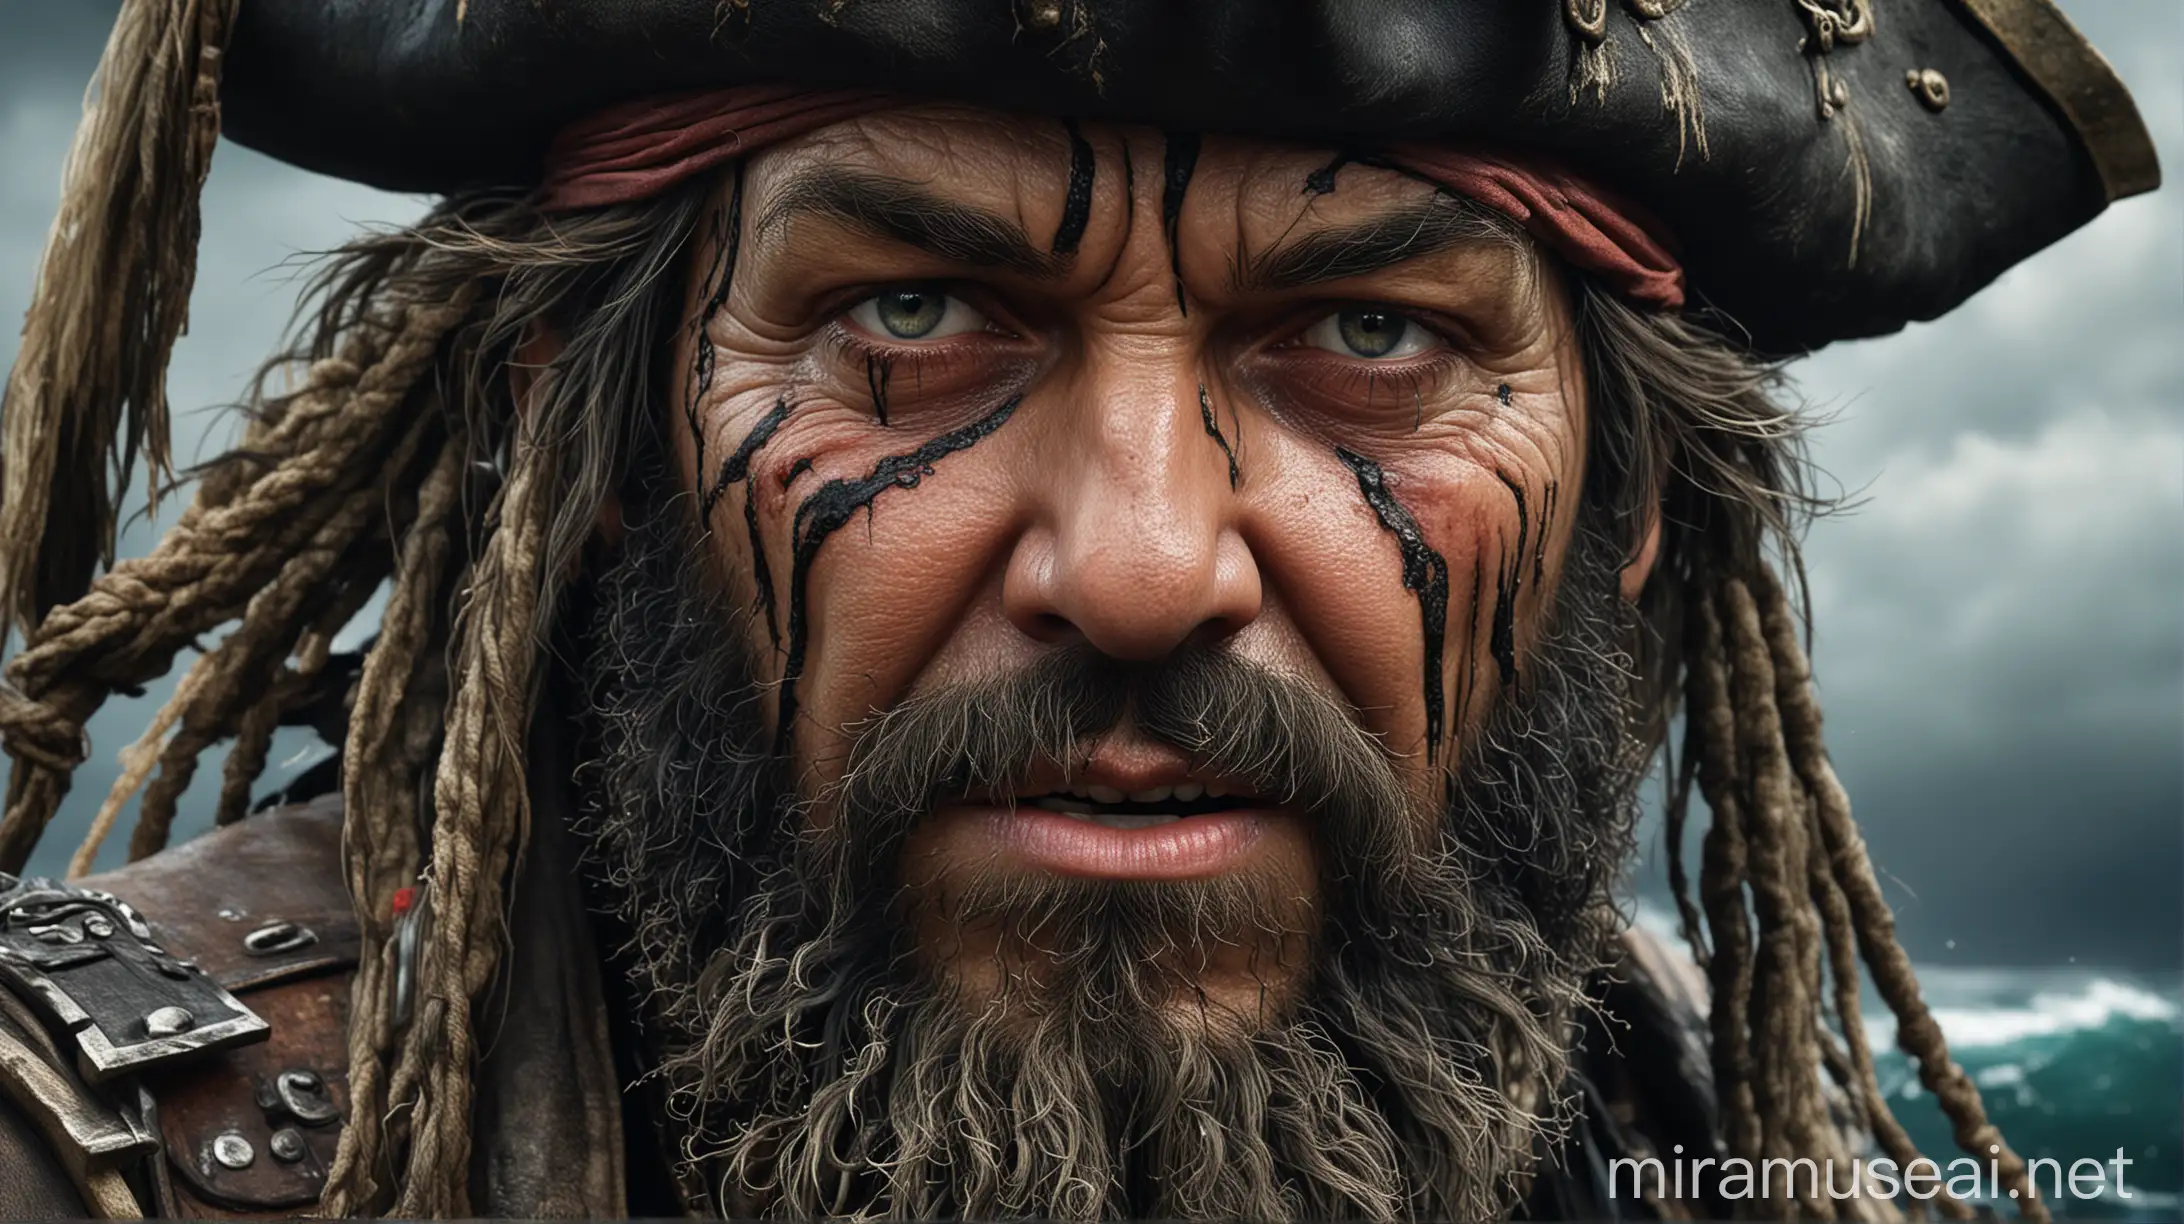 Hyper Realistic Portrait of Blackbeard the Pirate with Weathered Features and Menacing Glint